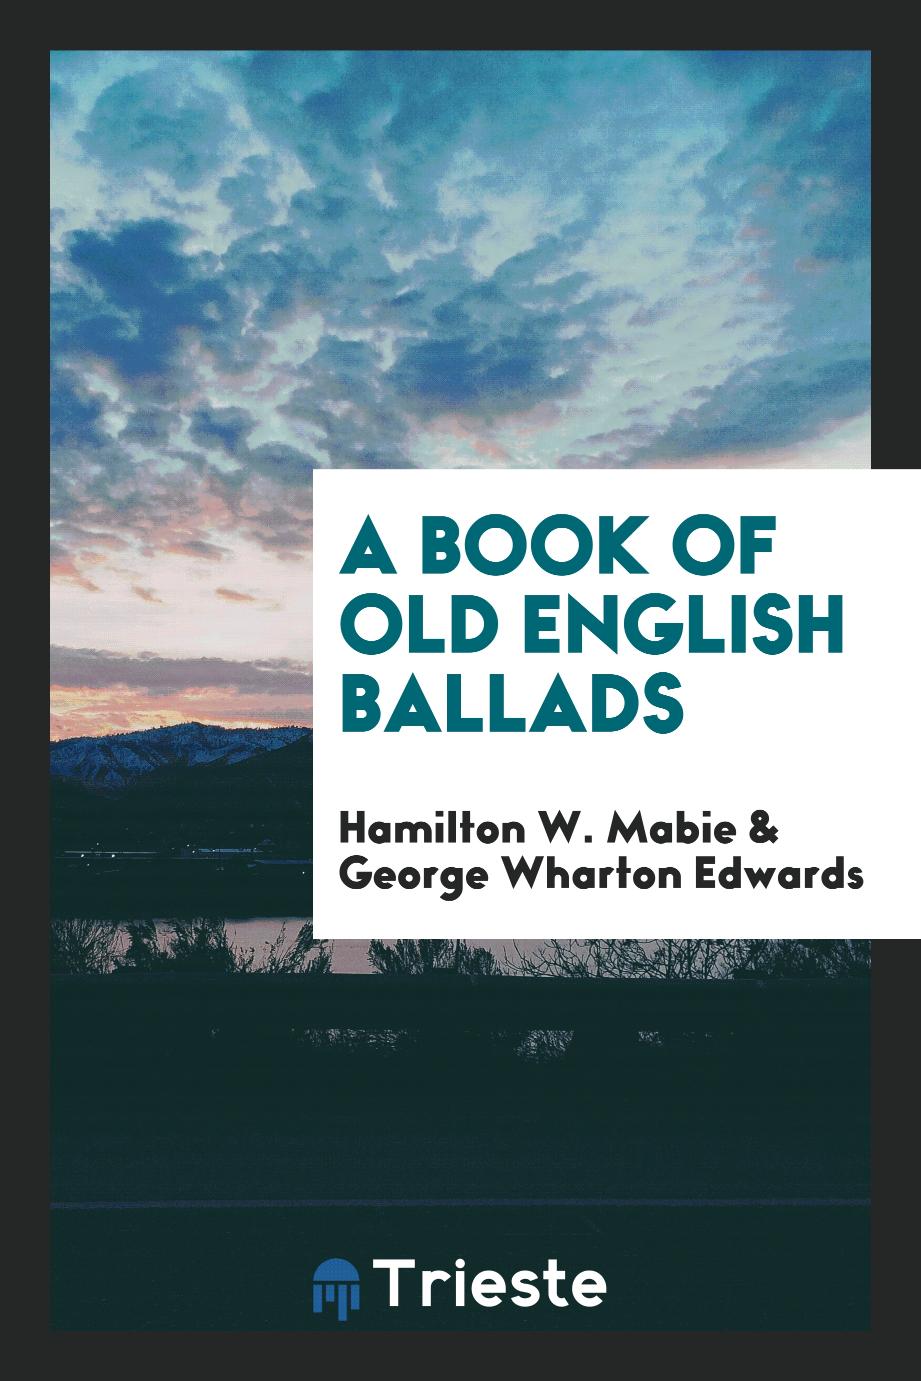 A book of old English ballads